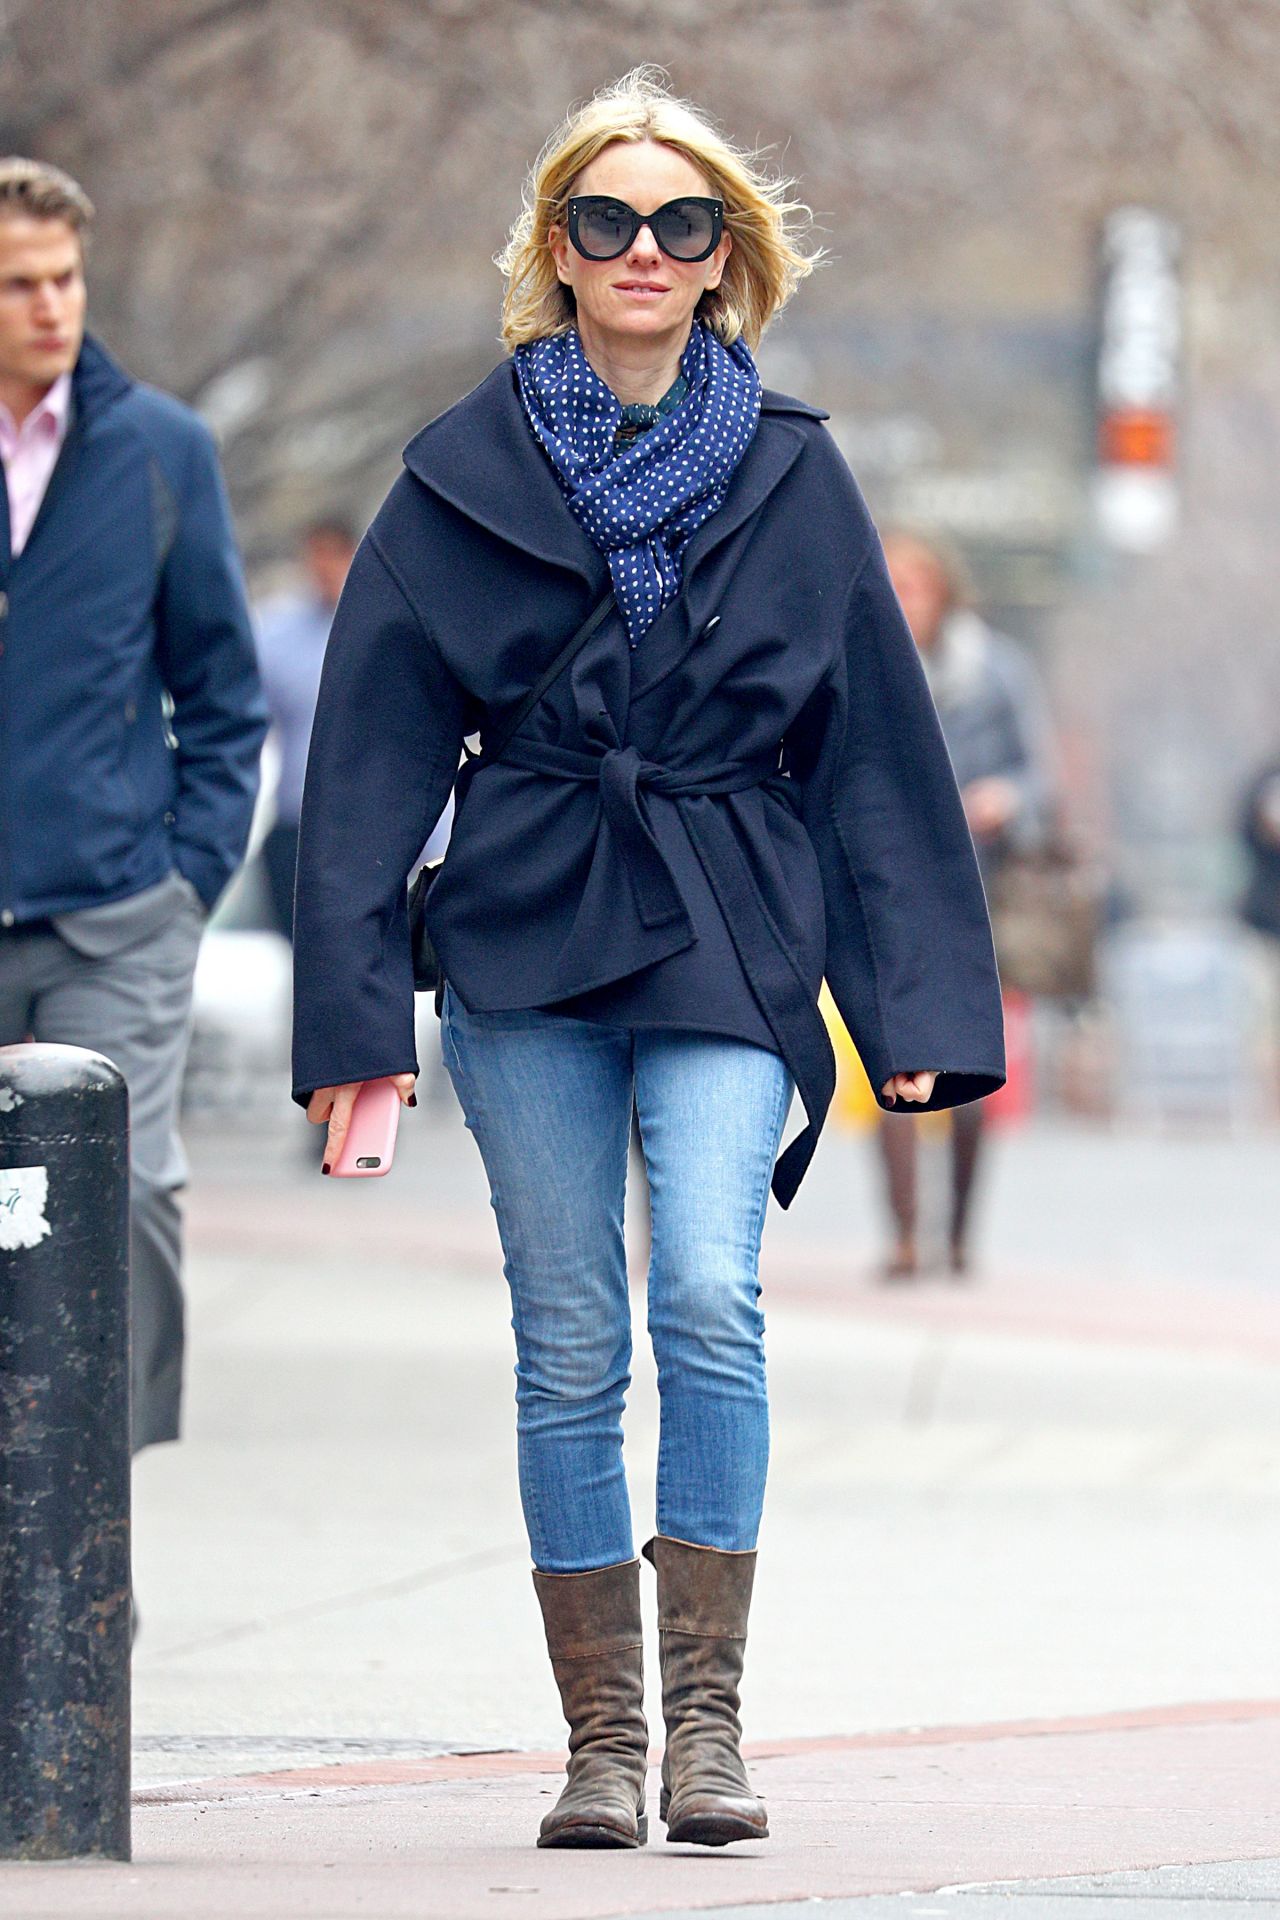 Naomi Watts in a Navy Coat and Blue Denim Jeans - NYC 03/29/2018 ...